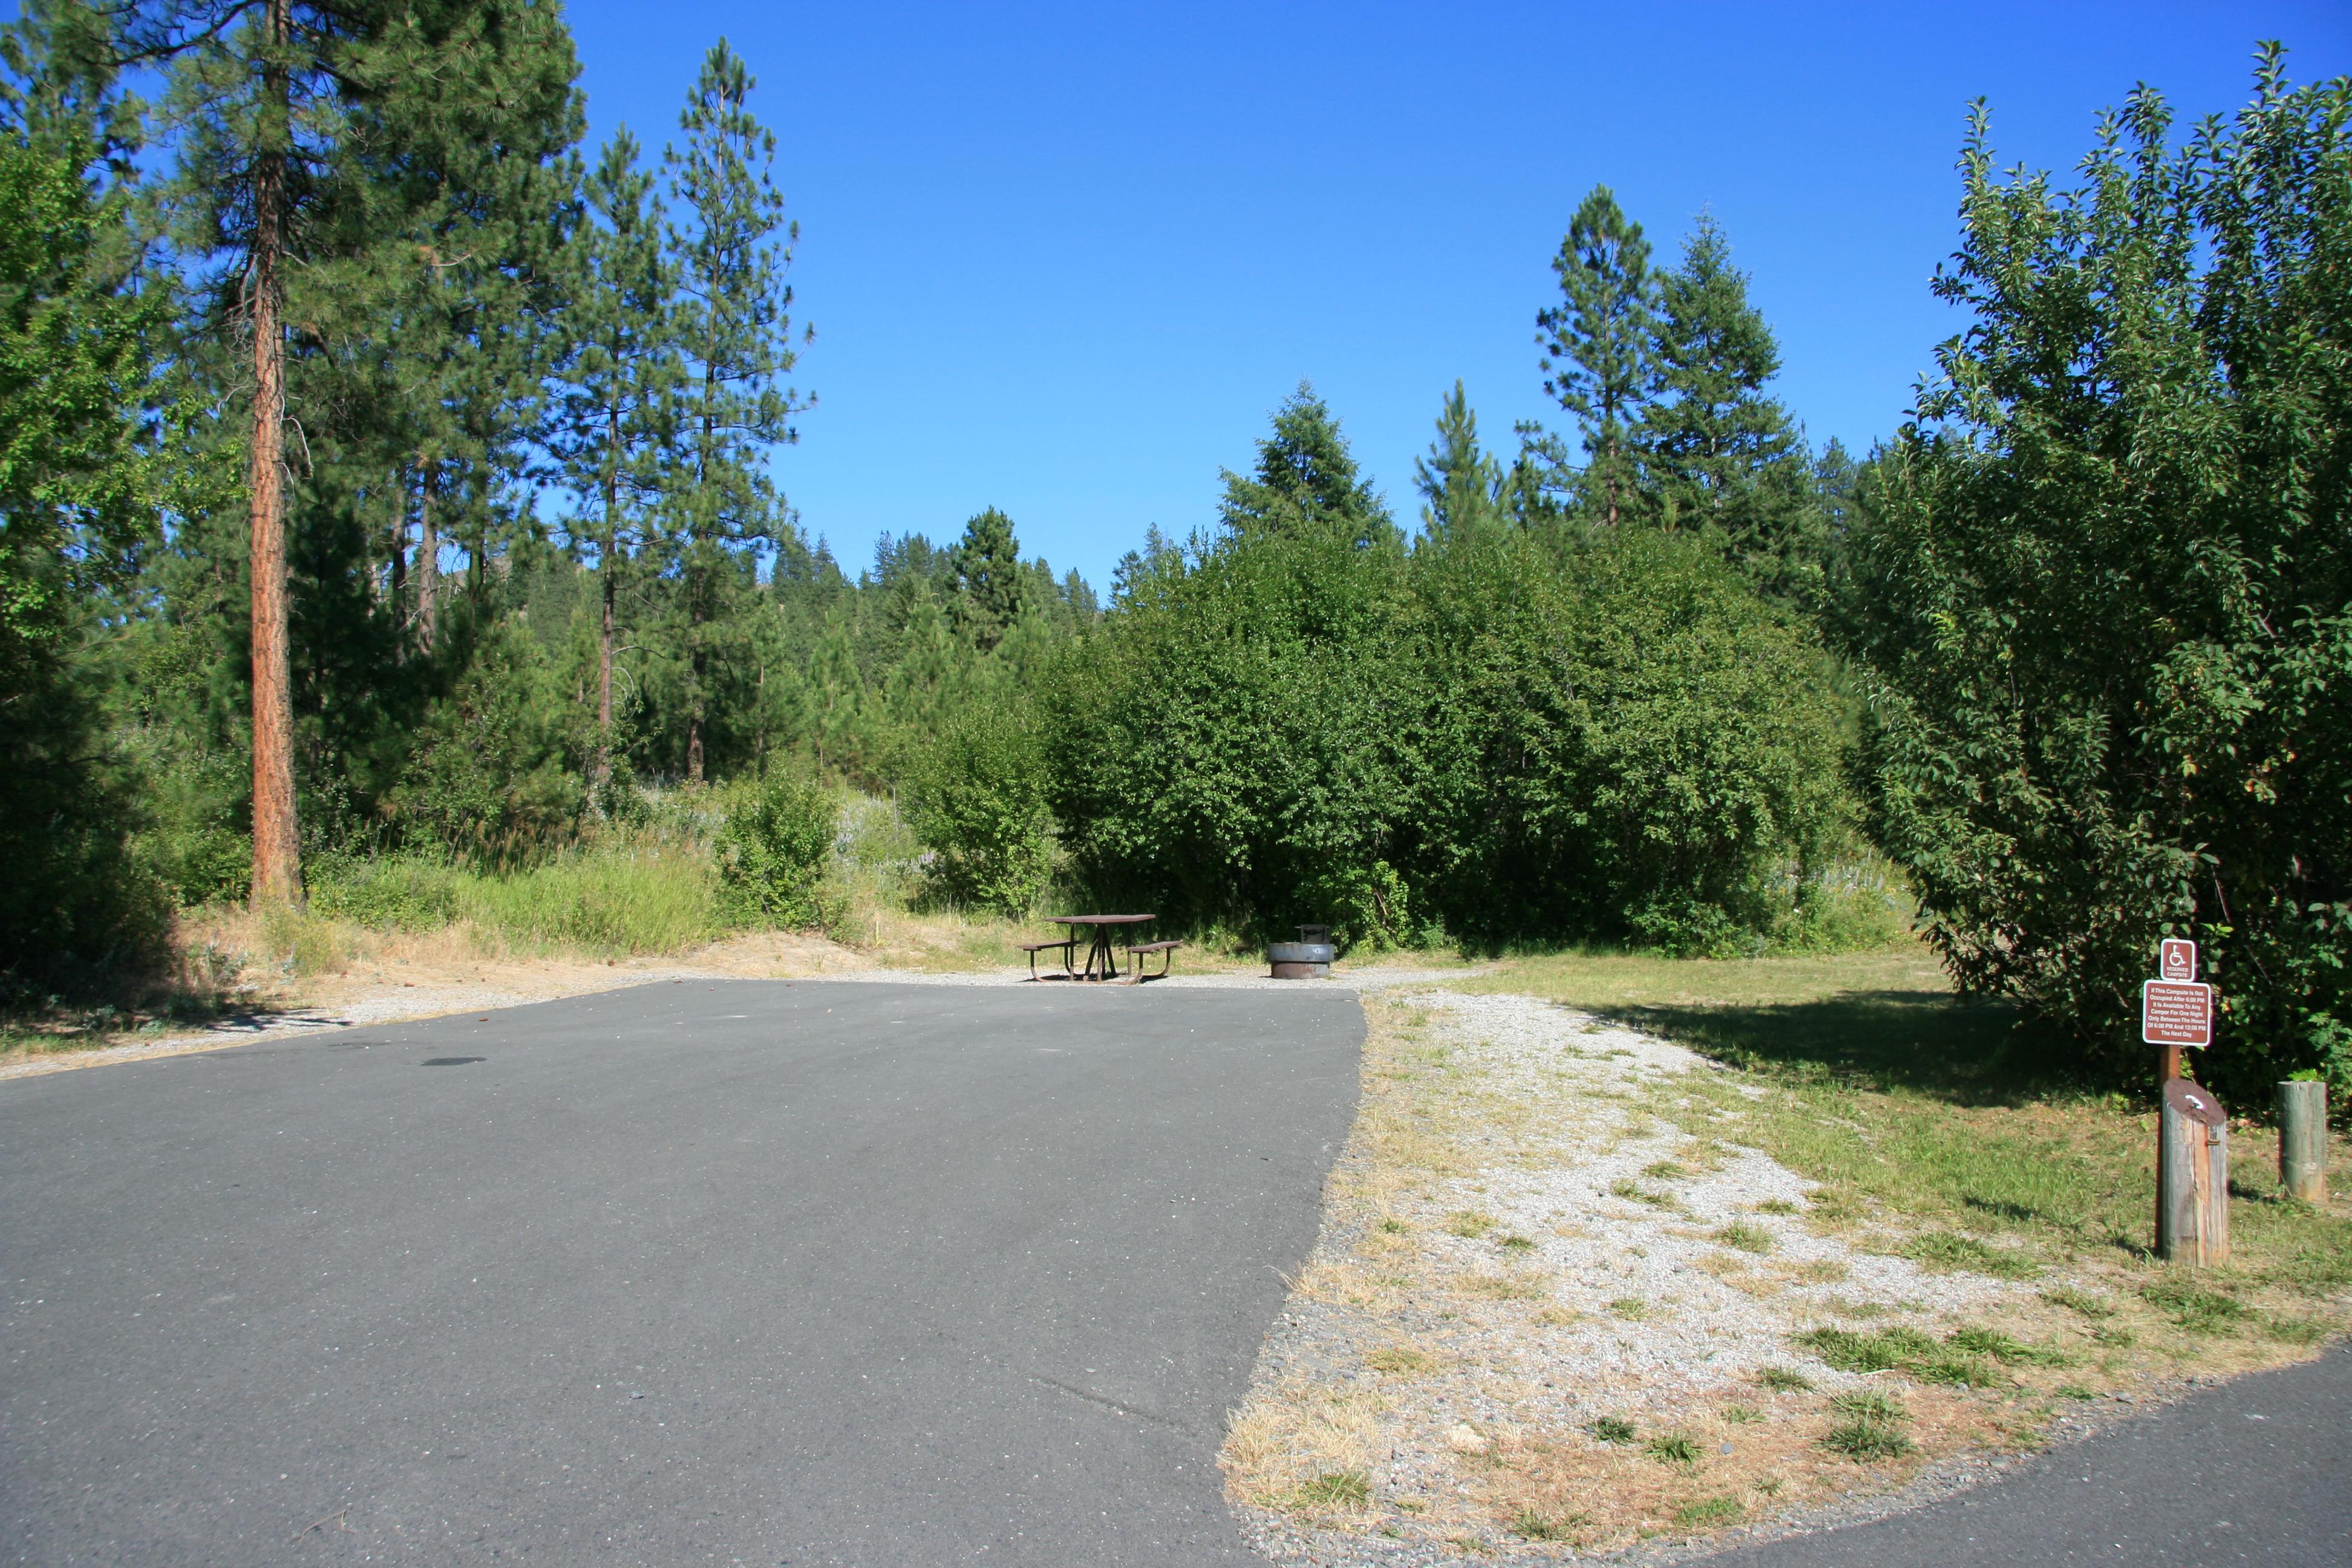 A broadly paved accessible campsite at Hunters Campground.